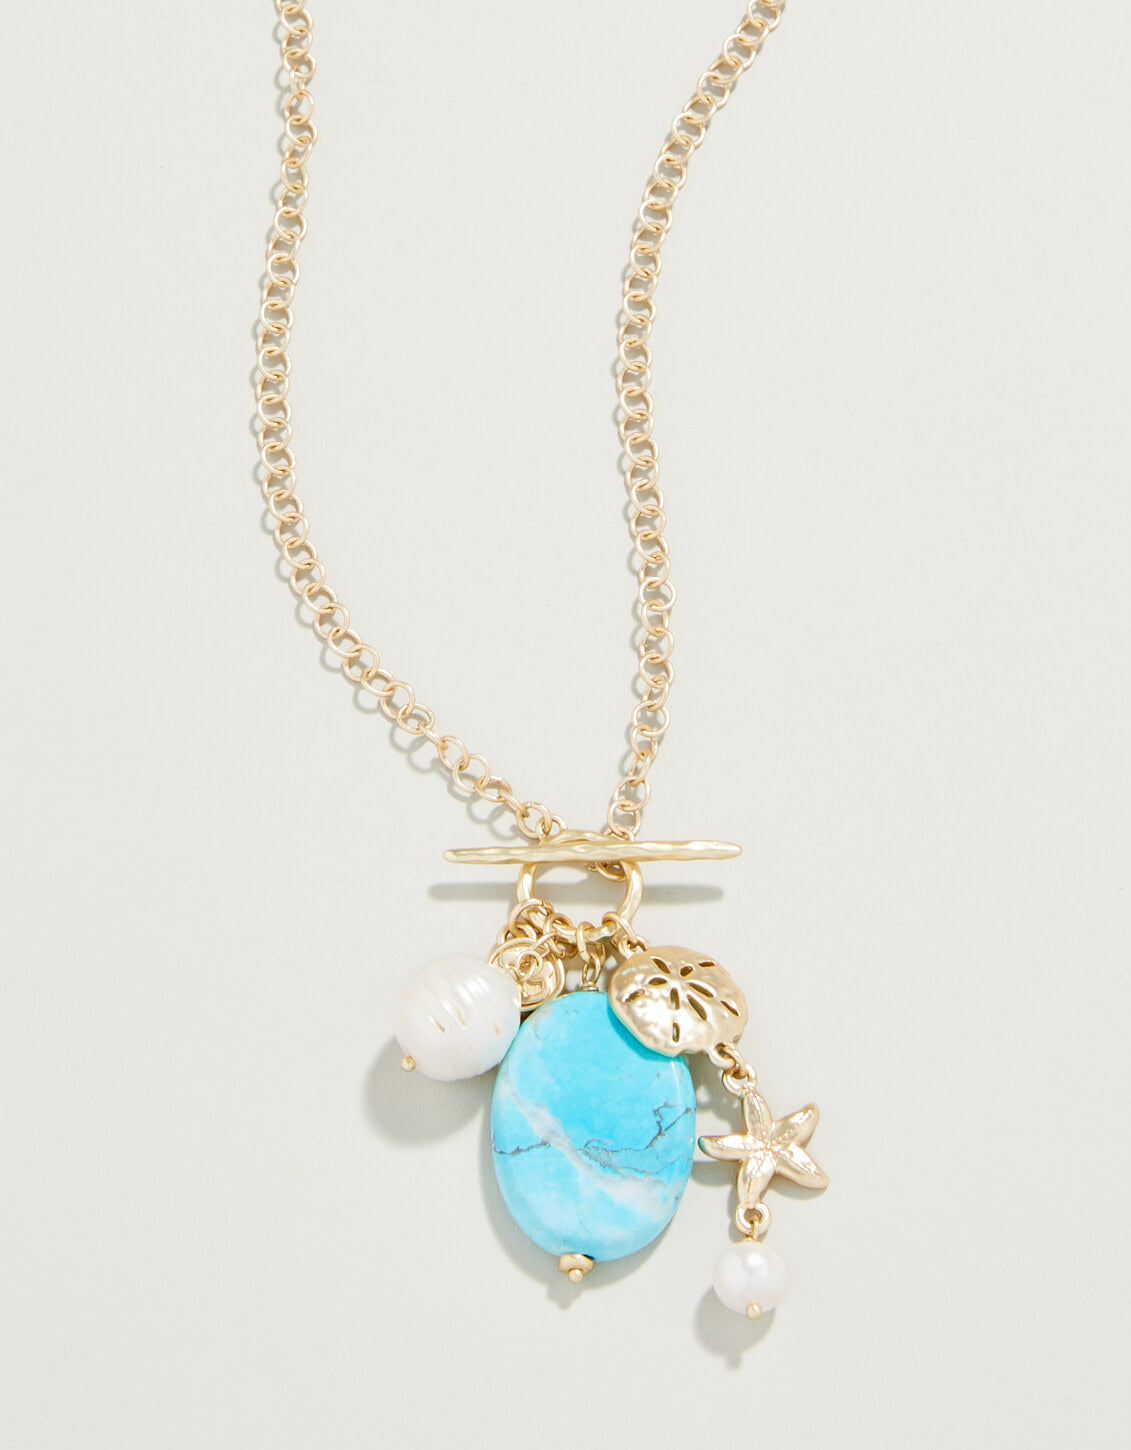 Spartina Seaside Necklace 32" Turquoise/Pearl